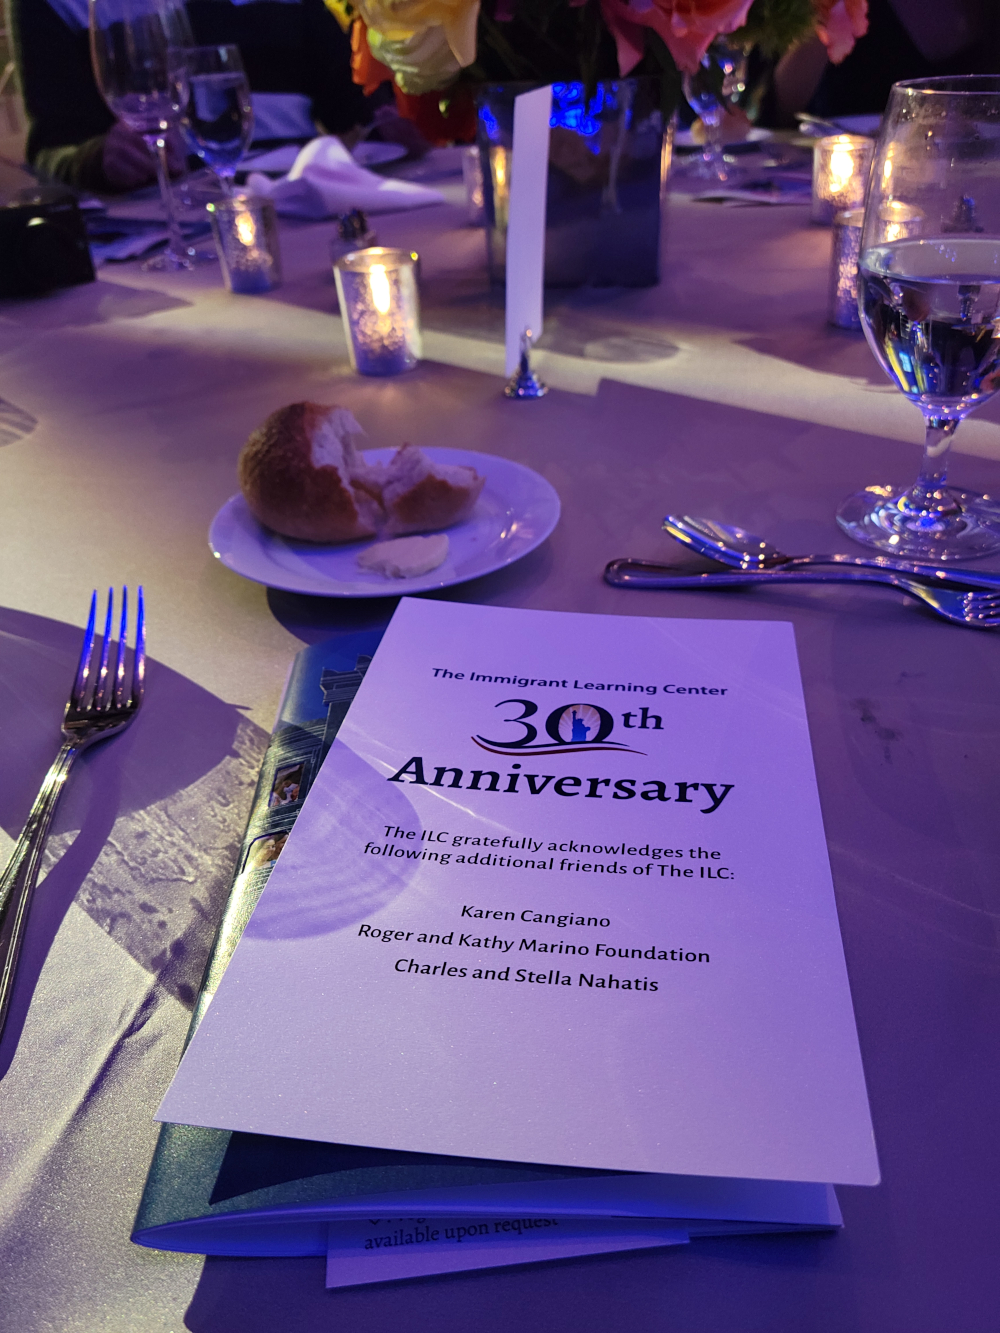 The Immigrant Learning Center's 30th Anniversary sponsors.